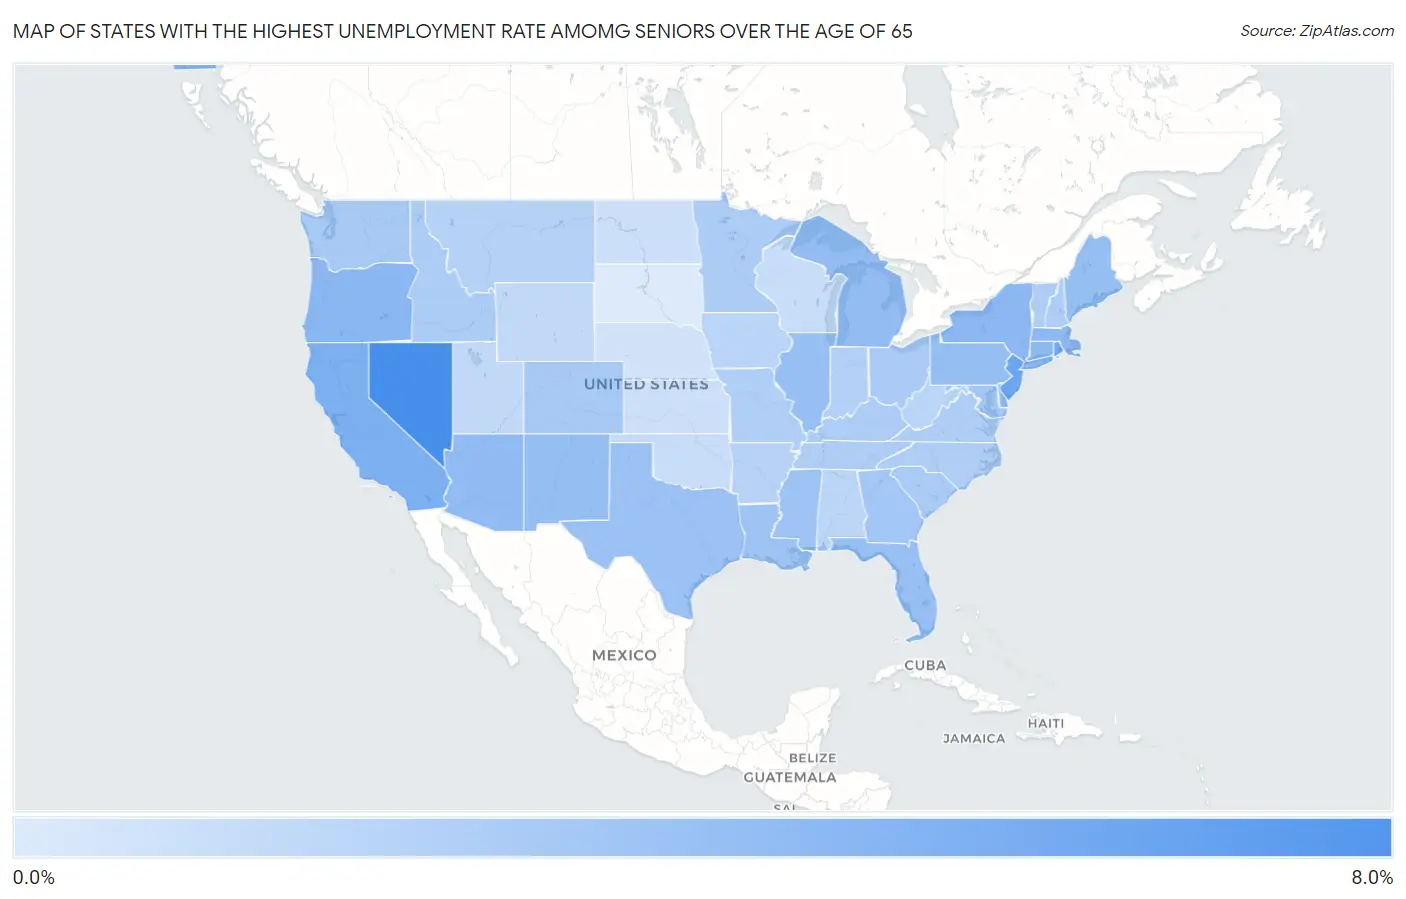 States with the Highest Unemployment Rate Amomg Seniors Over the Age of 65 in the United States Map